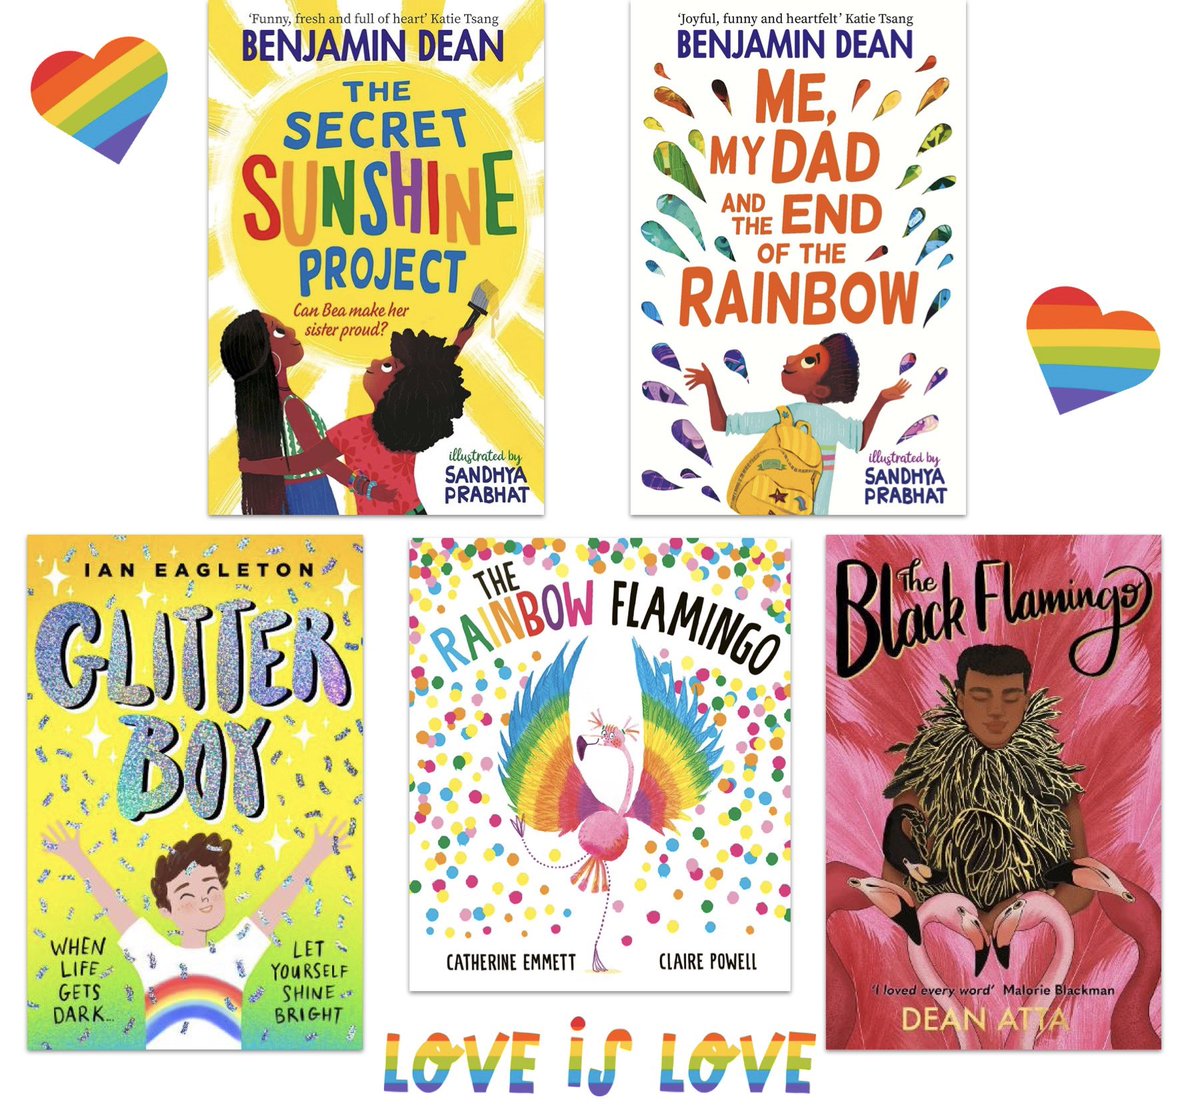 It’s Pride Month! So many great books out there for young readers, middle graders and teens. Glitter Boy and The Black Flamingo are next on my TBR pile. 😊🏳️‍🌈#pridemonth #inclusivebooks #booksarewindowsandmirrors @MrEagletonIan @NotAgainBen @DeanAtta @Emmett_Cath